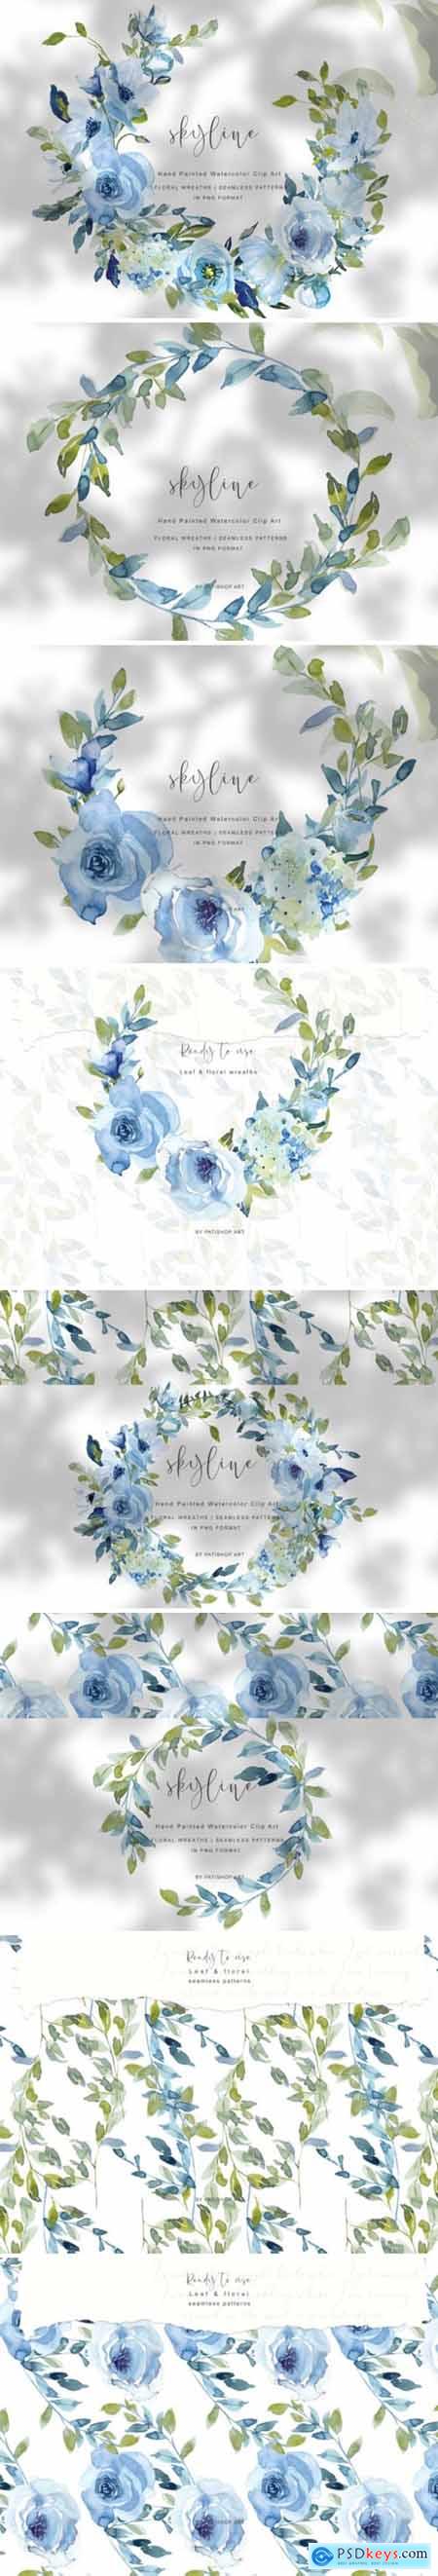 Hand Painted WatercolorFloral Wreath Set